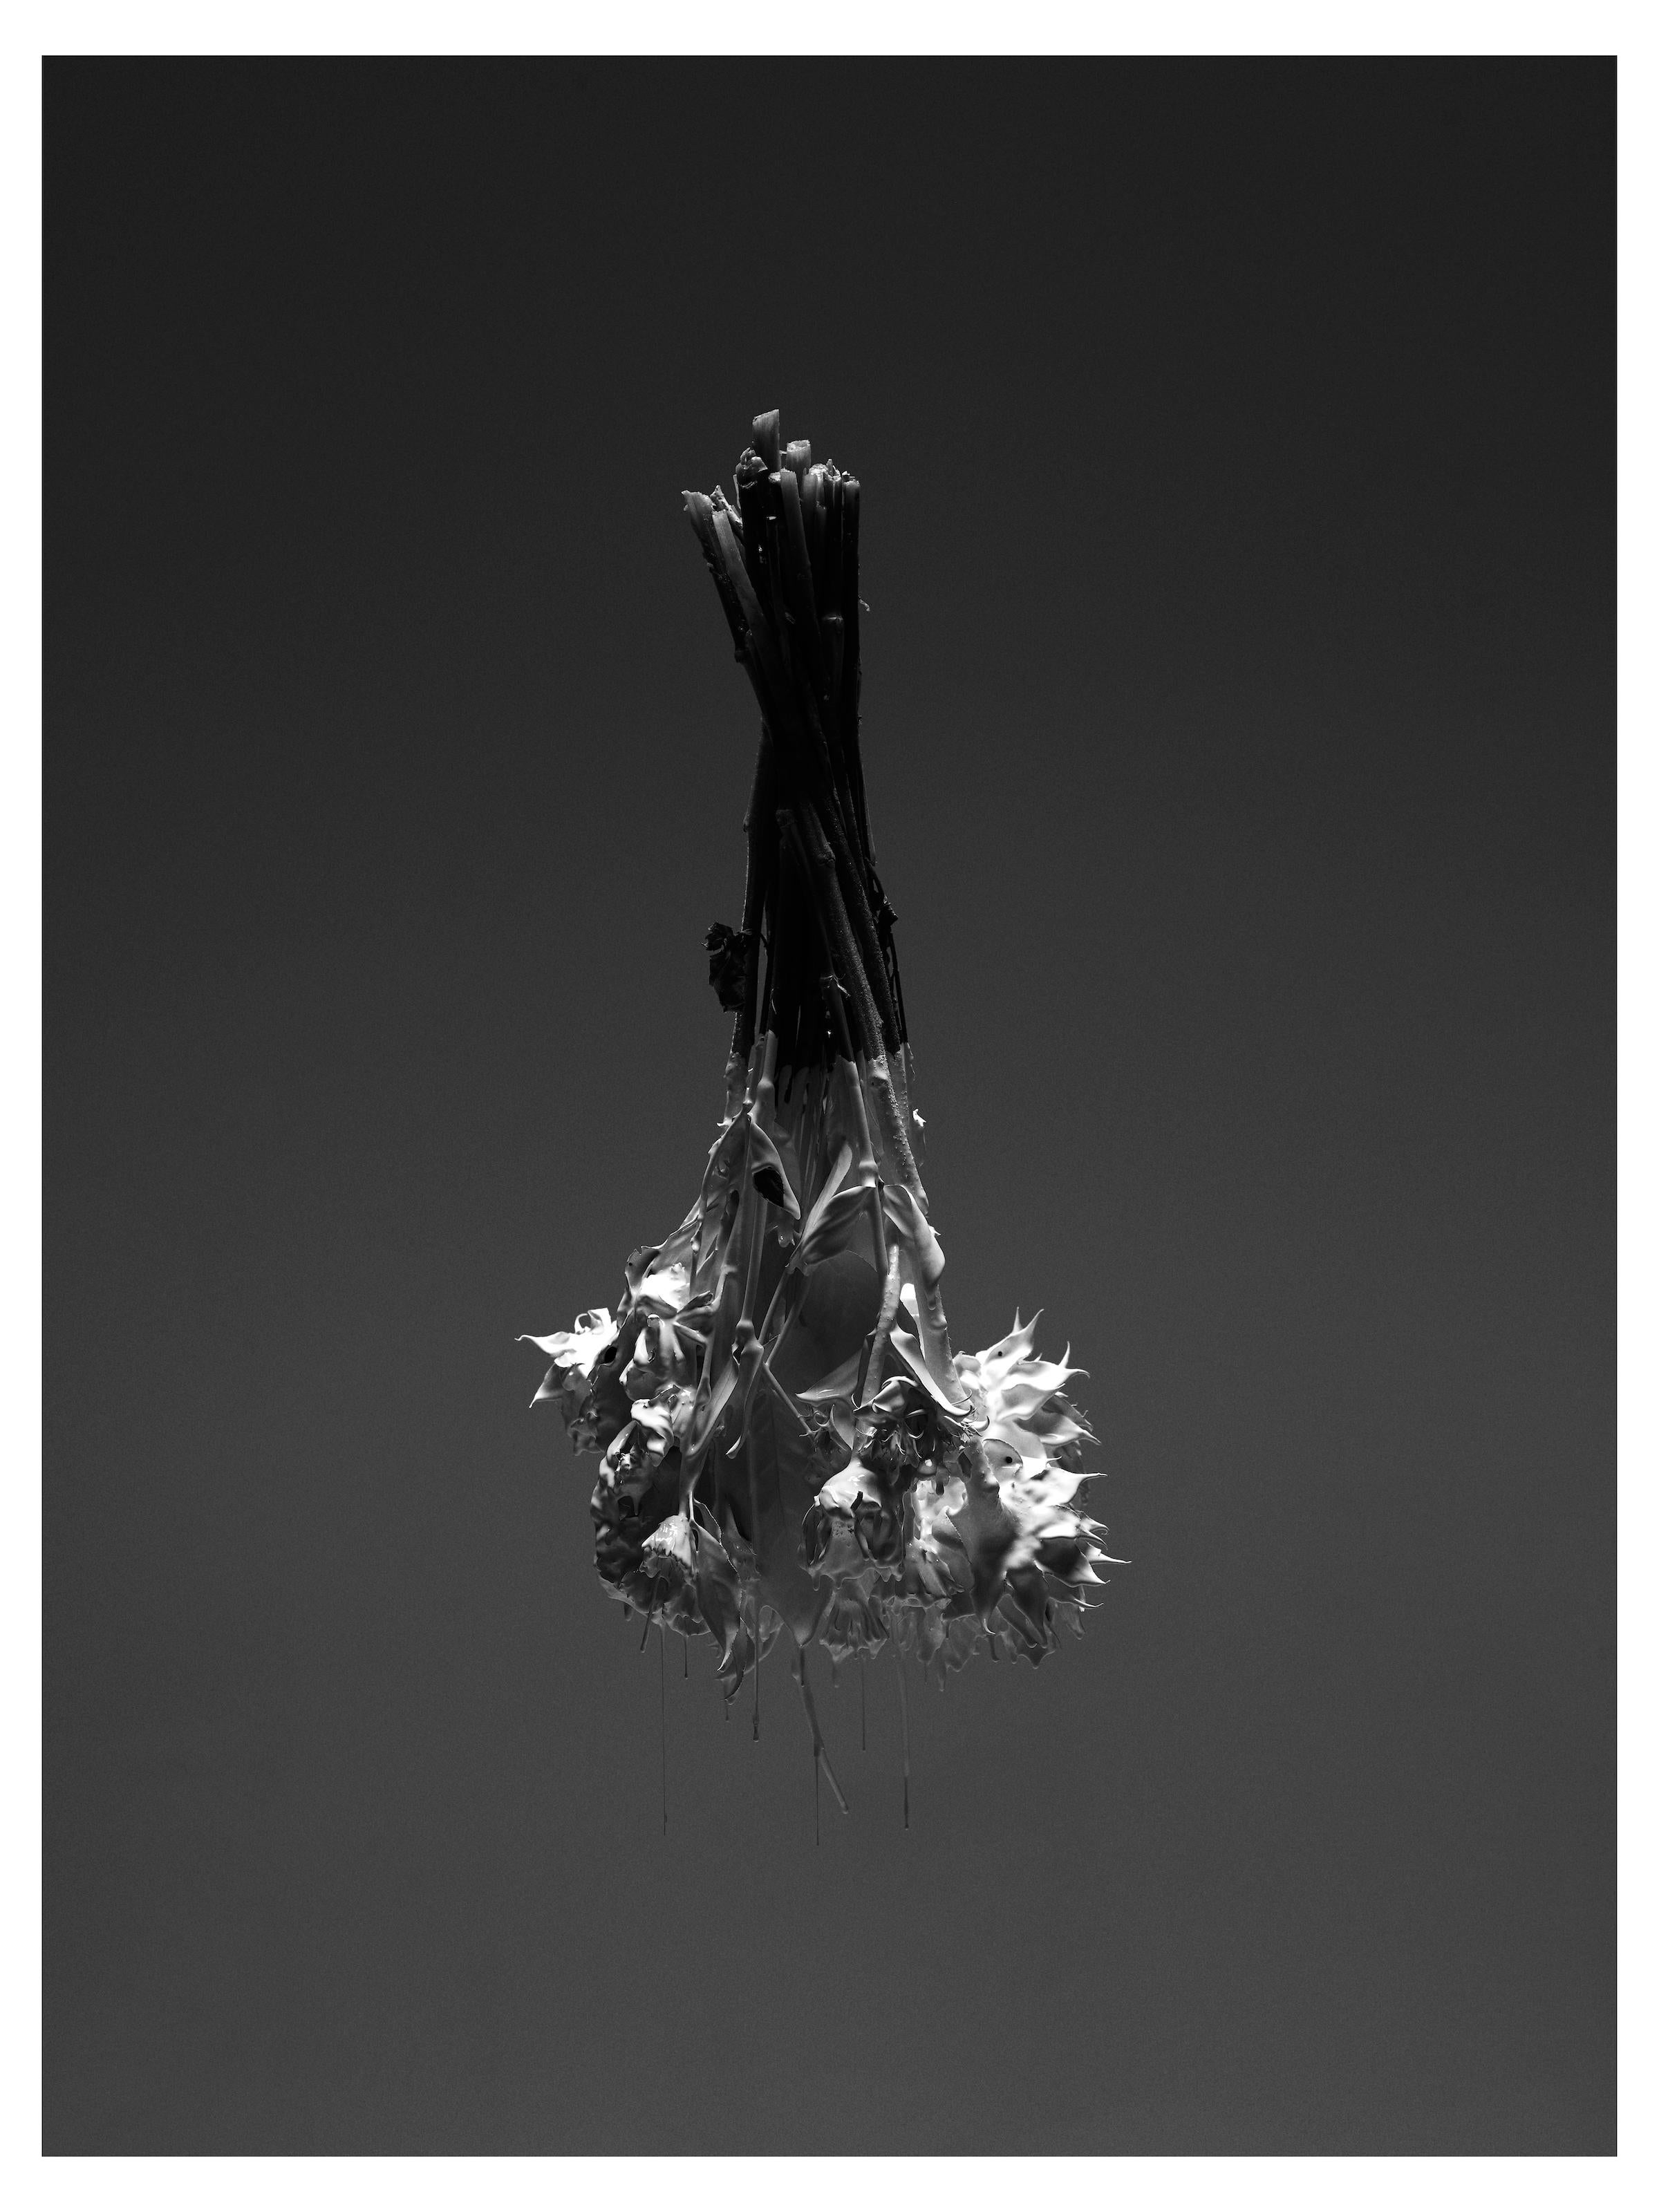 "Suspended Flora" Photography 40" x 30" inch Edition 1/20 by Ben Cope 